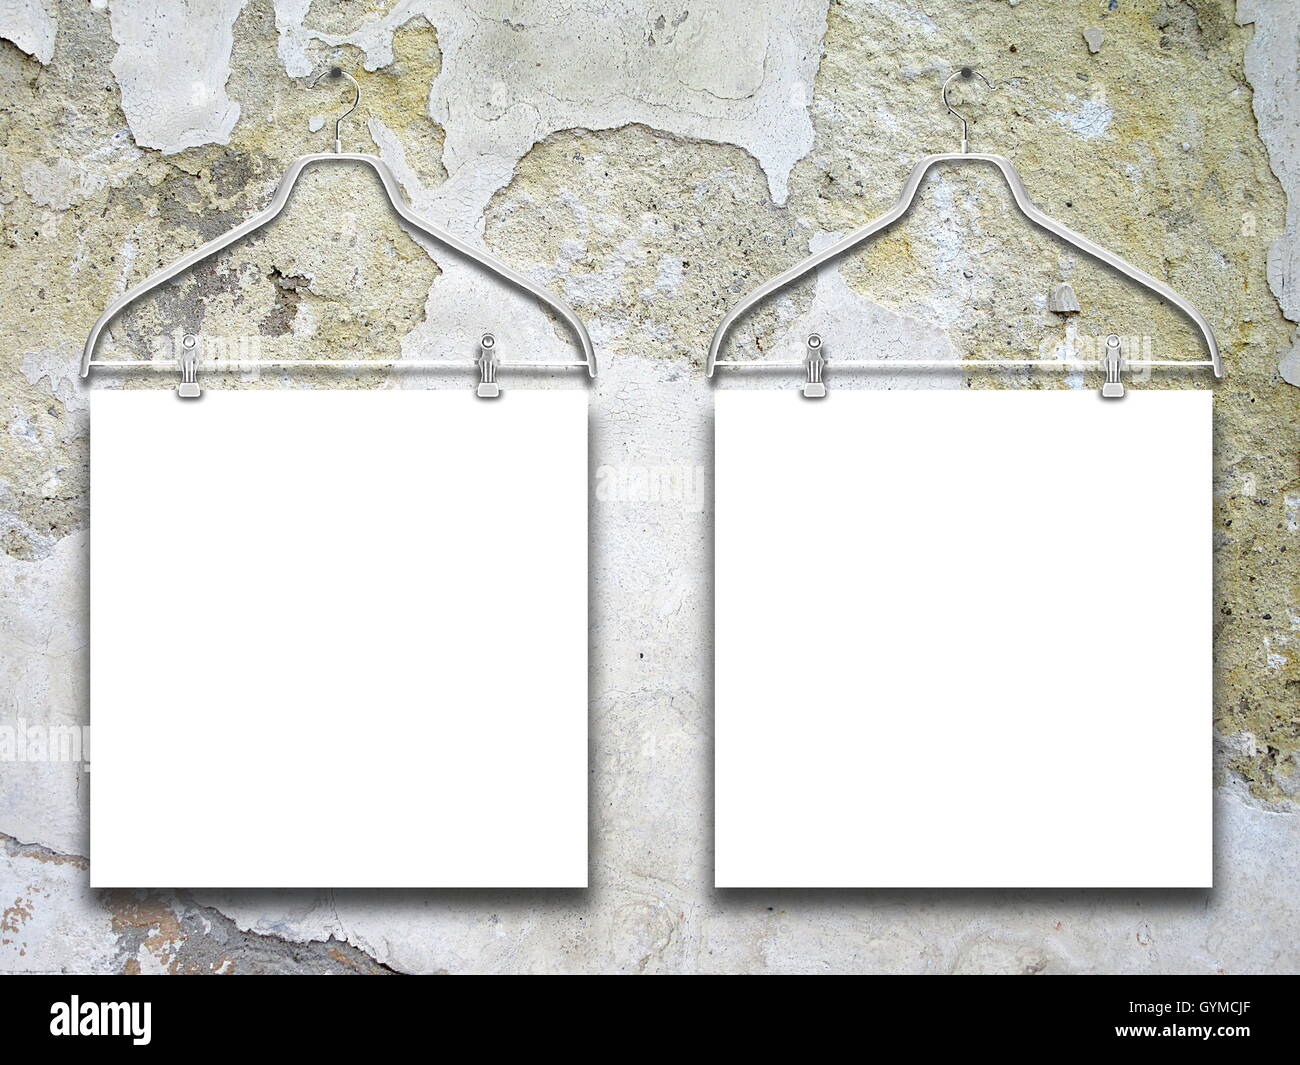 Close-up of two square blank frames hanged by clothes hangers against scratched concrete wall background Stock Photo